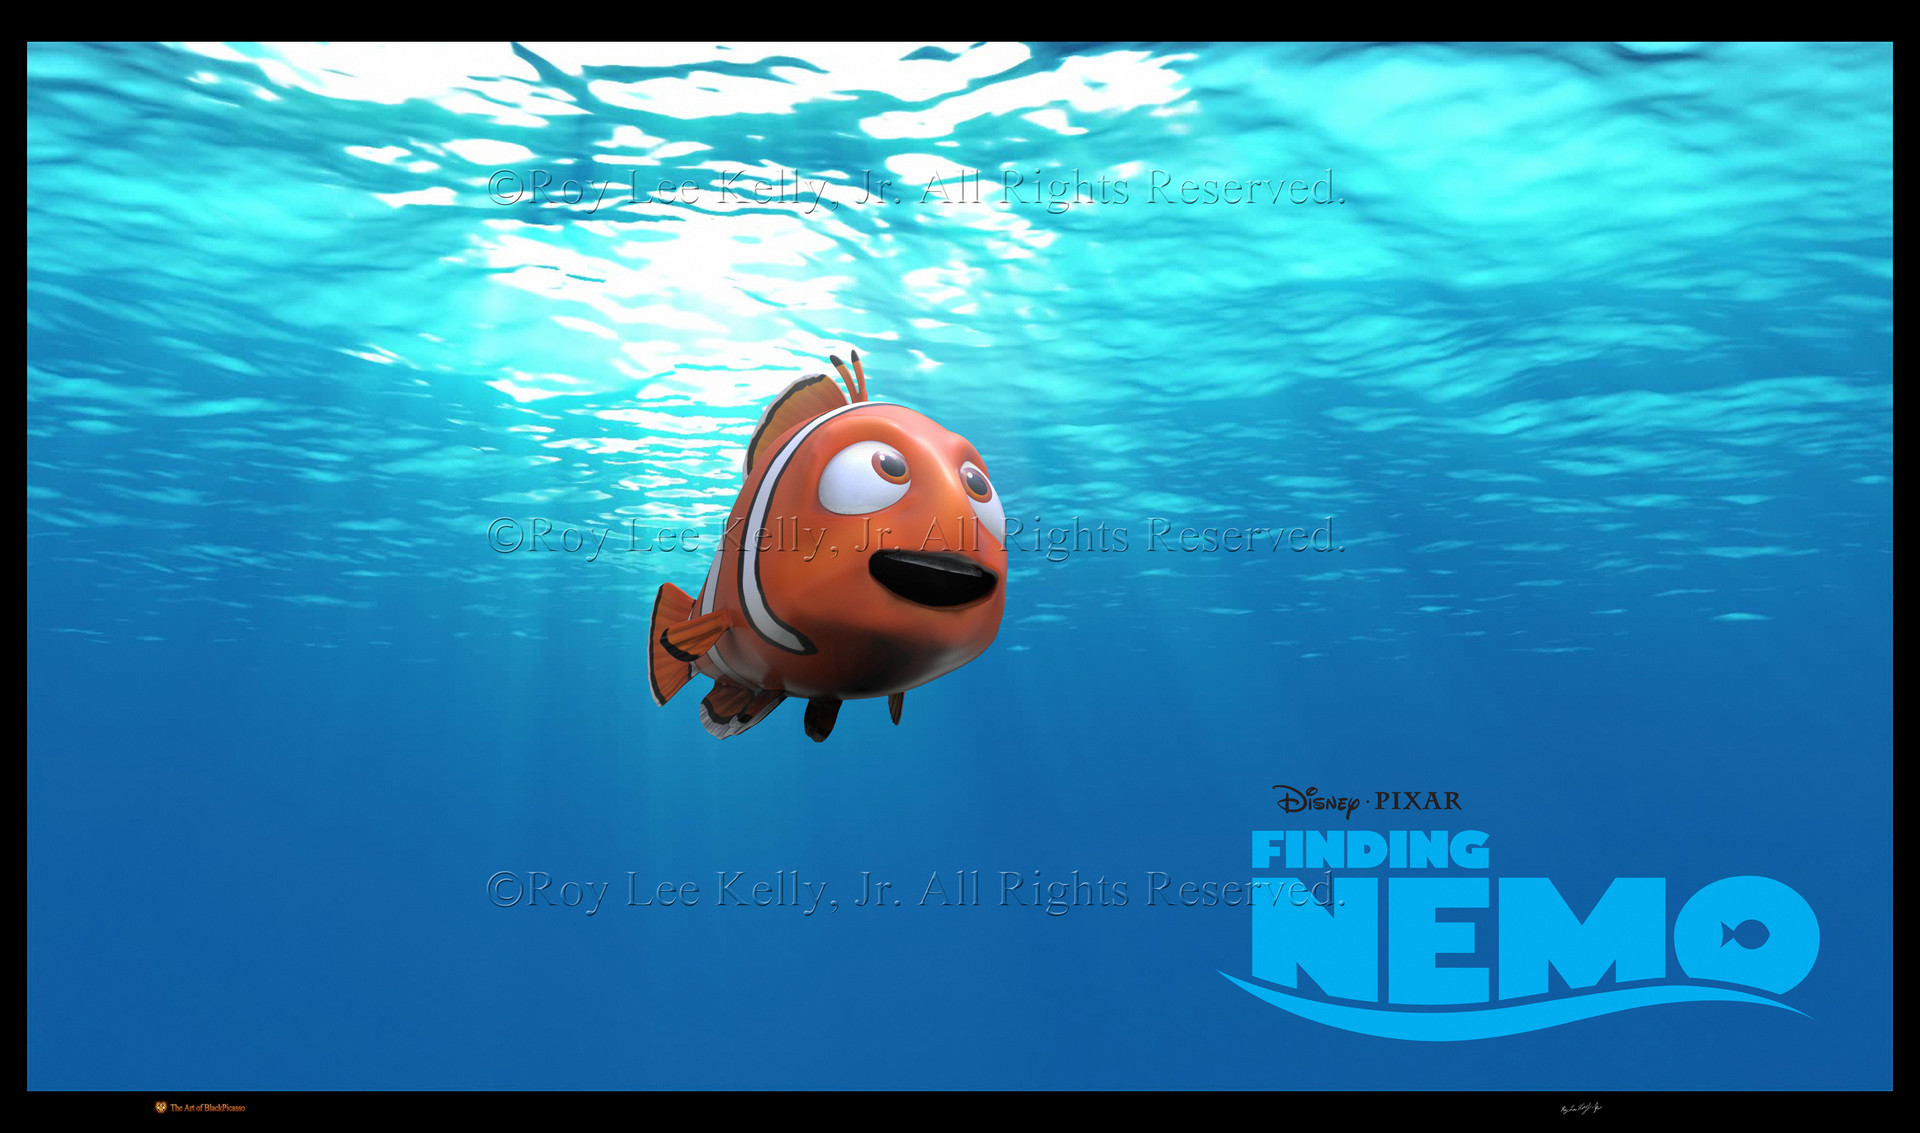 Roy Kelly, Jr. - Finding Nemo and Dory